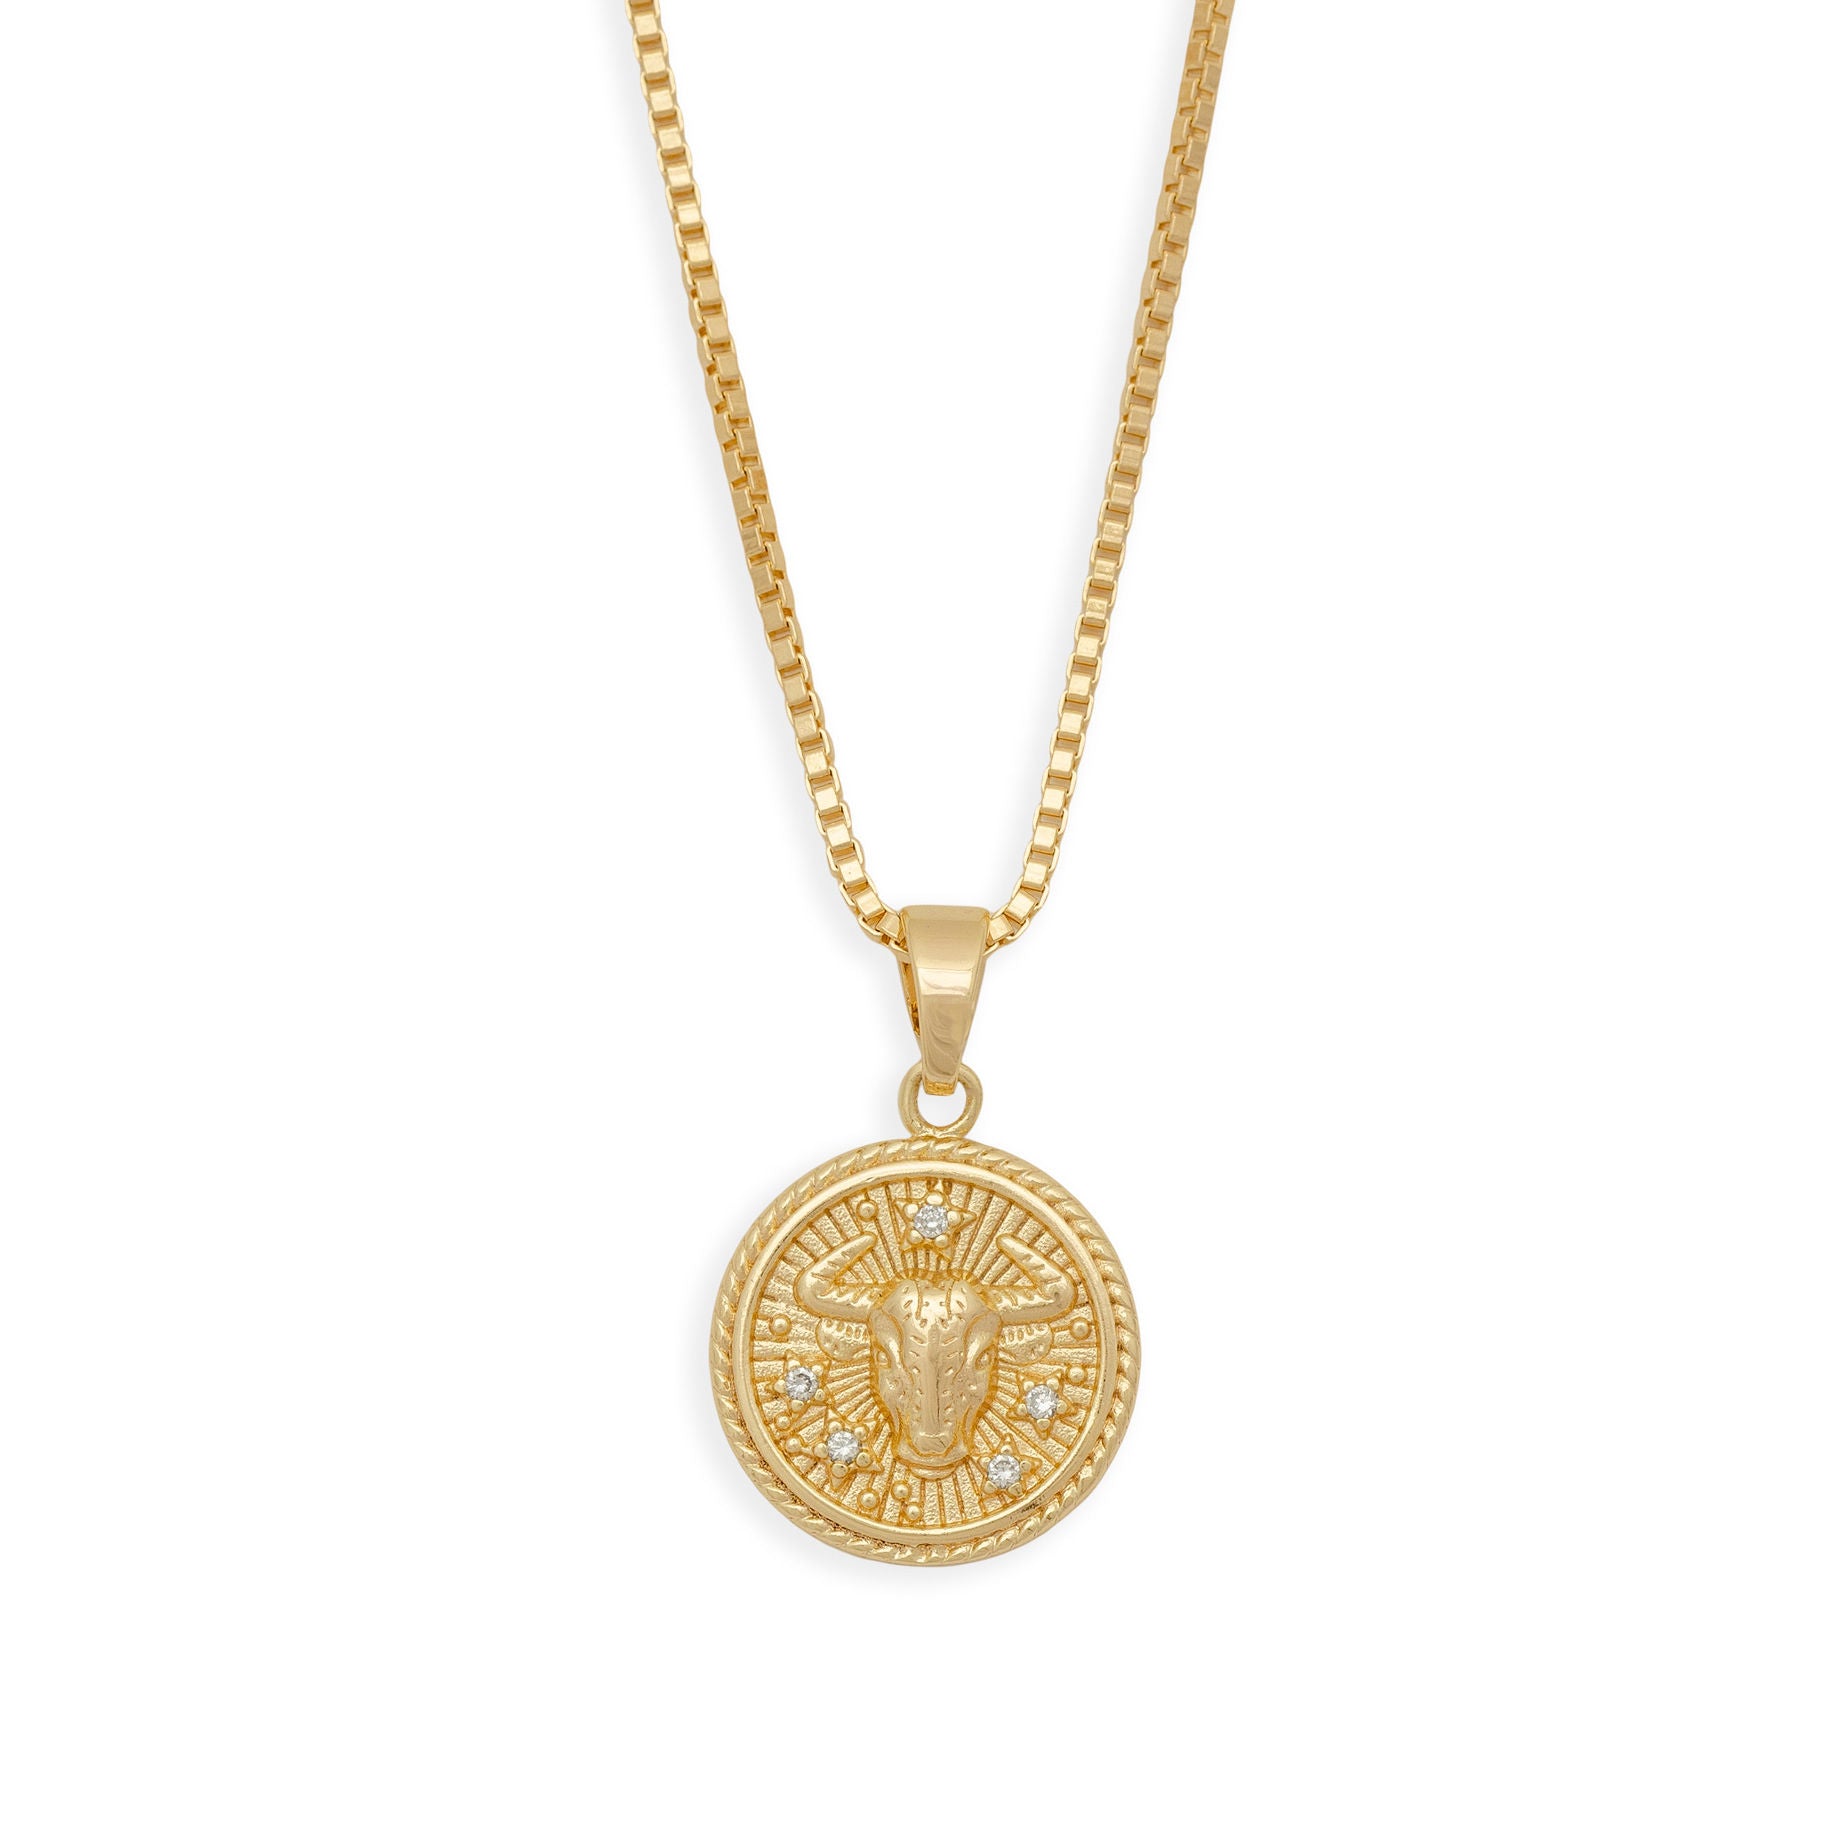 In the Stars Zodiac Necklace - Taurus from Erin Fader Jewelry